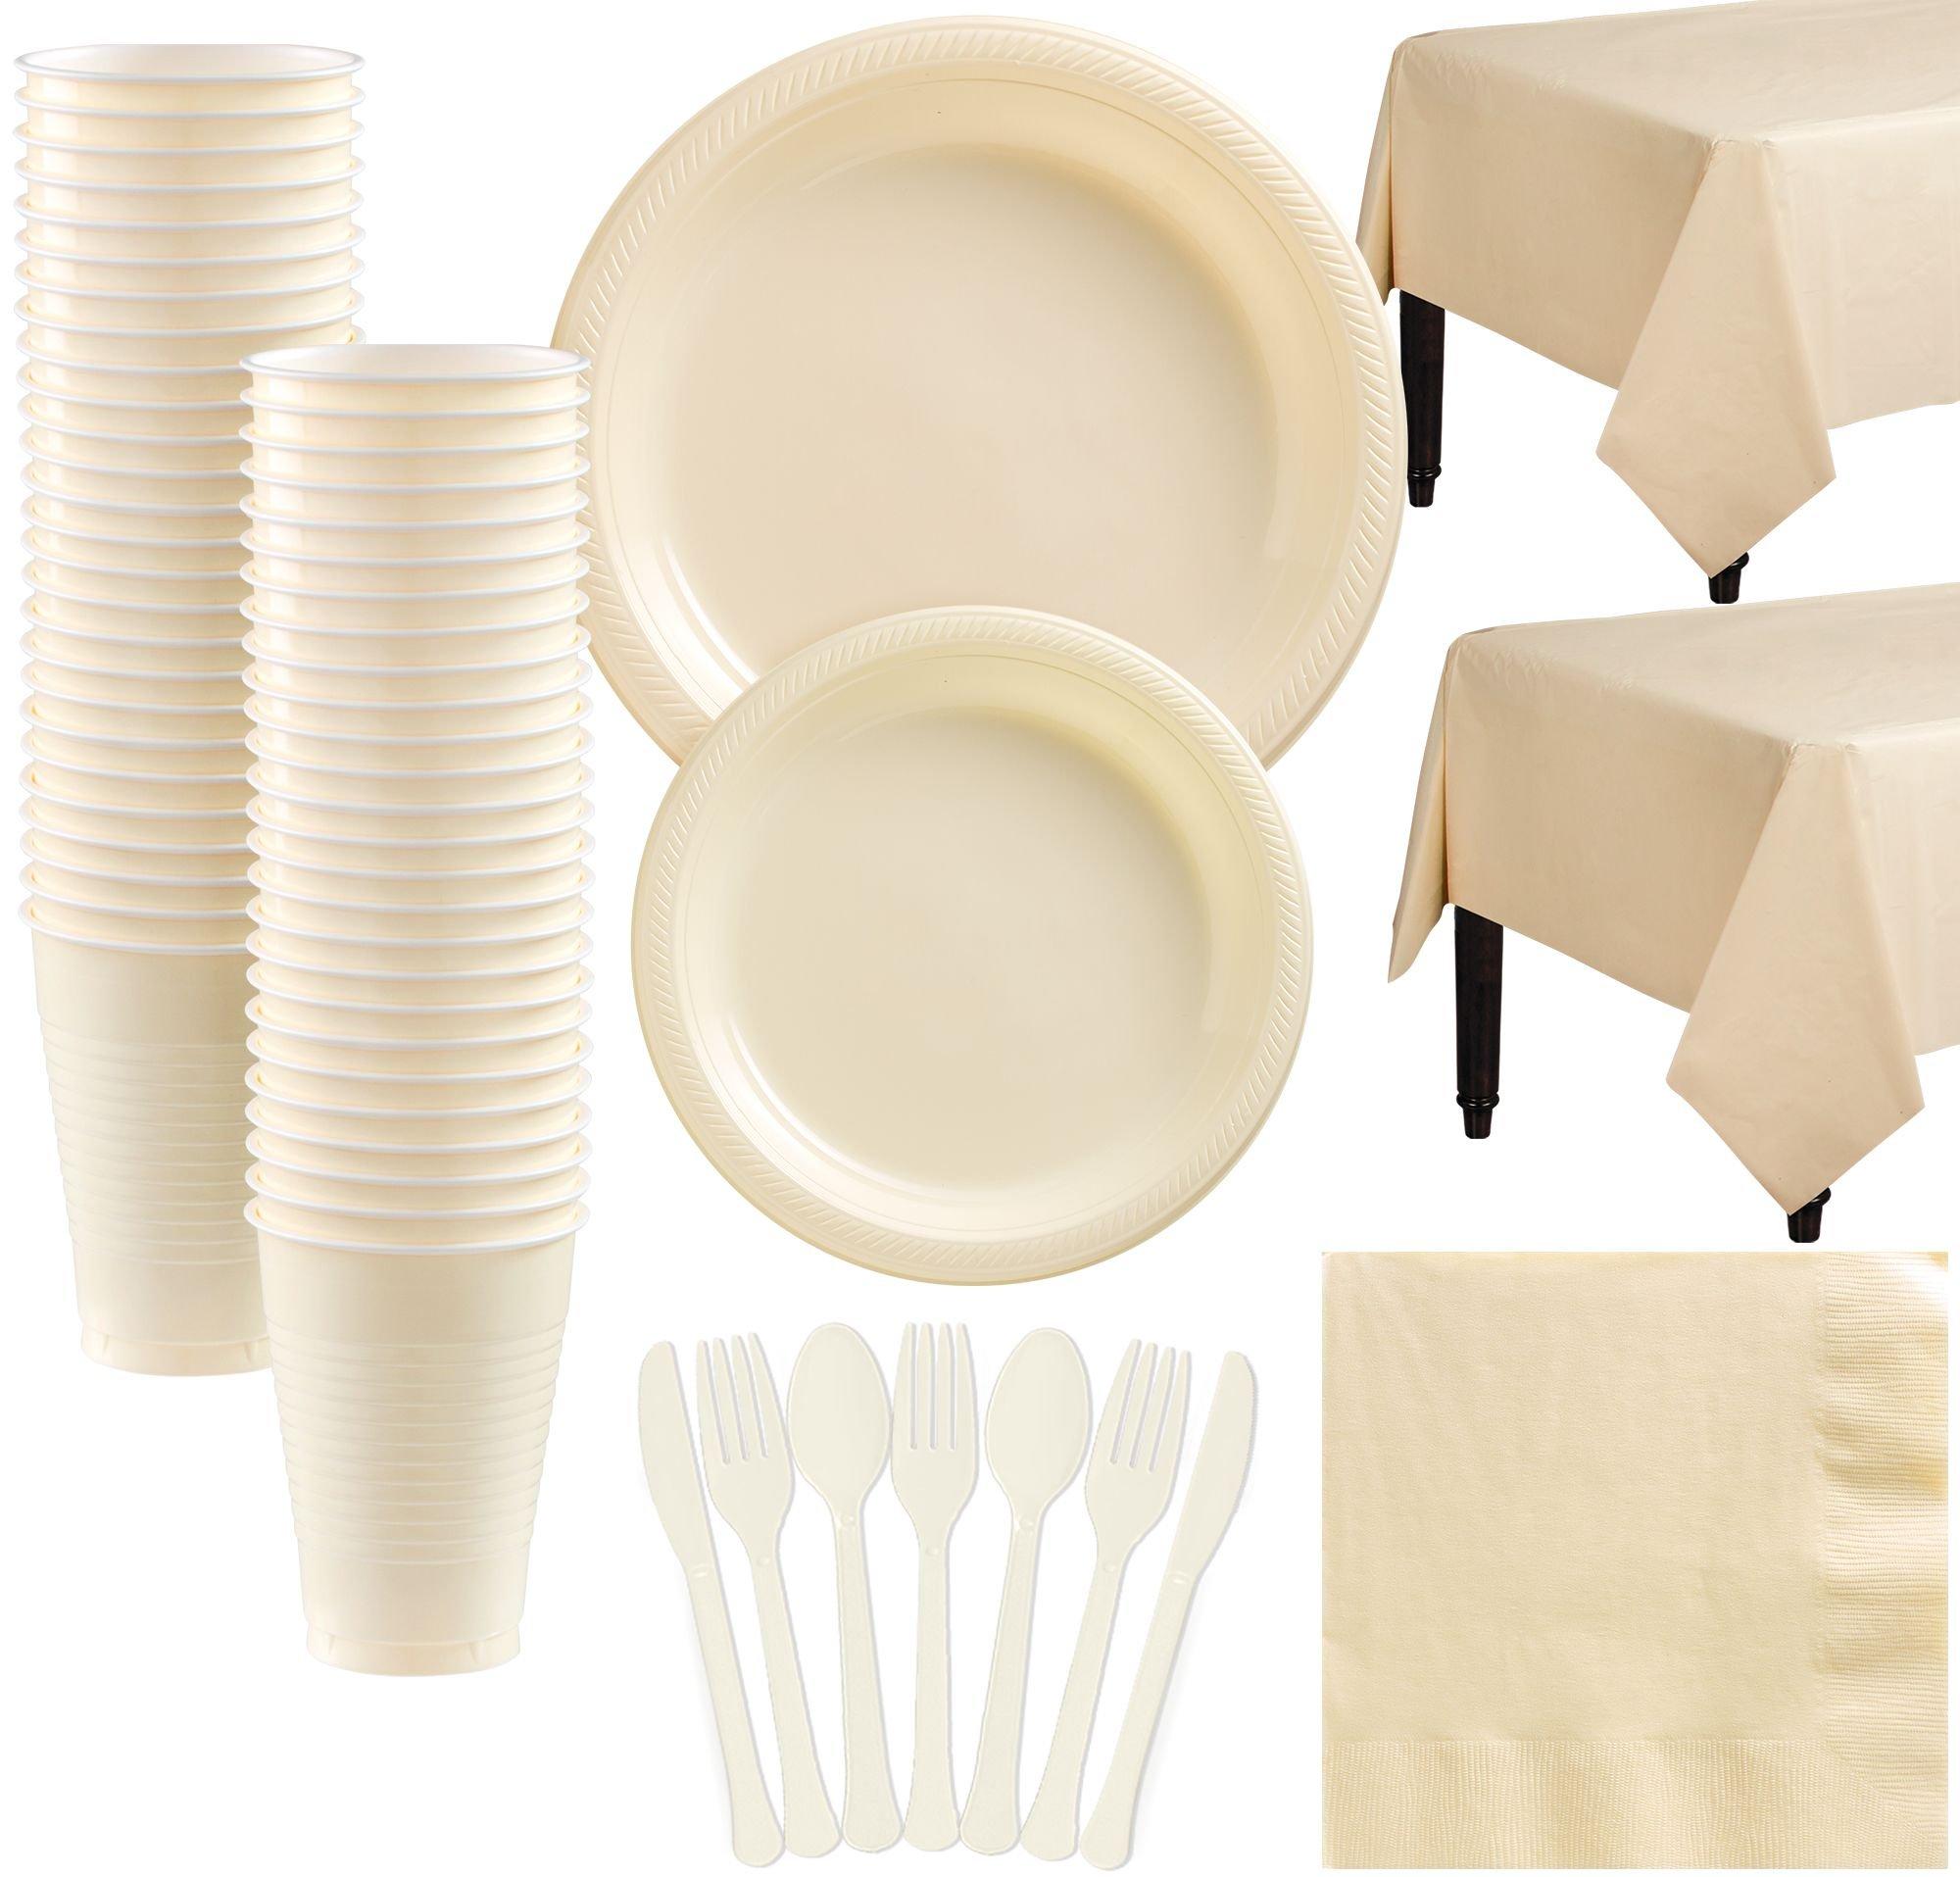 Plastic Tableware Kit for 50 Guests